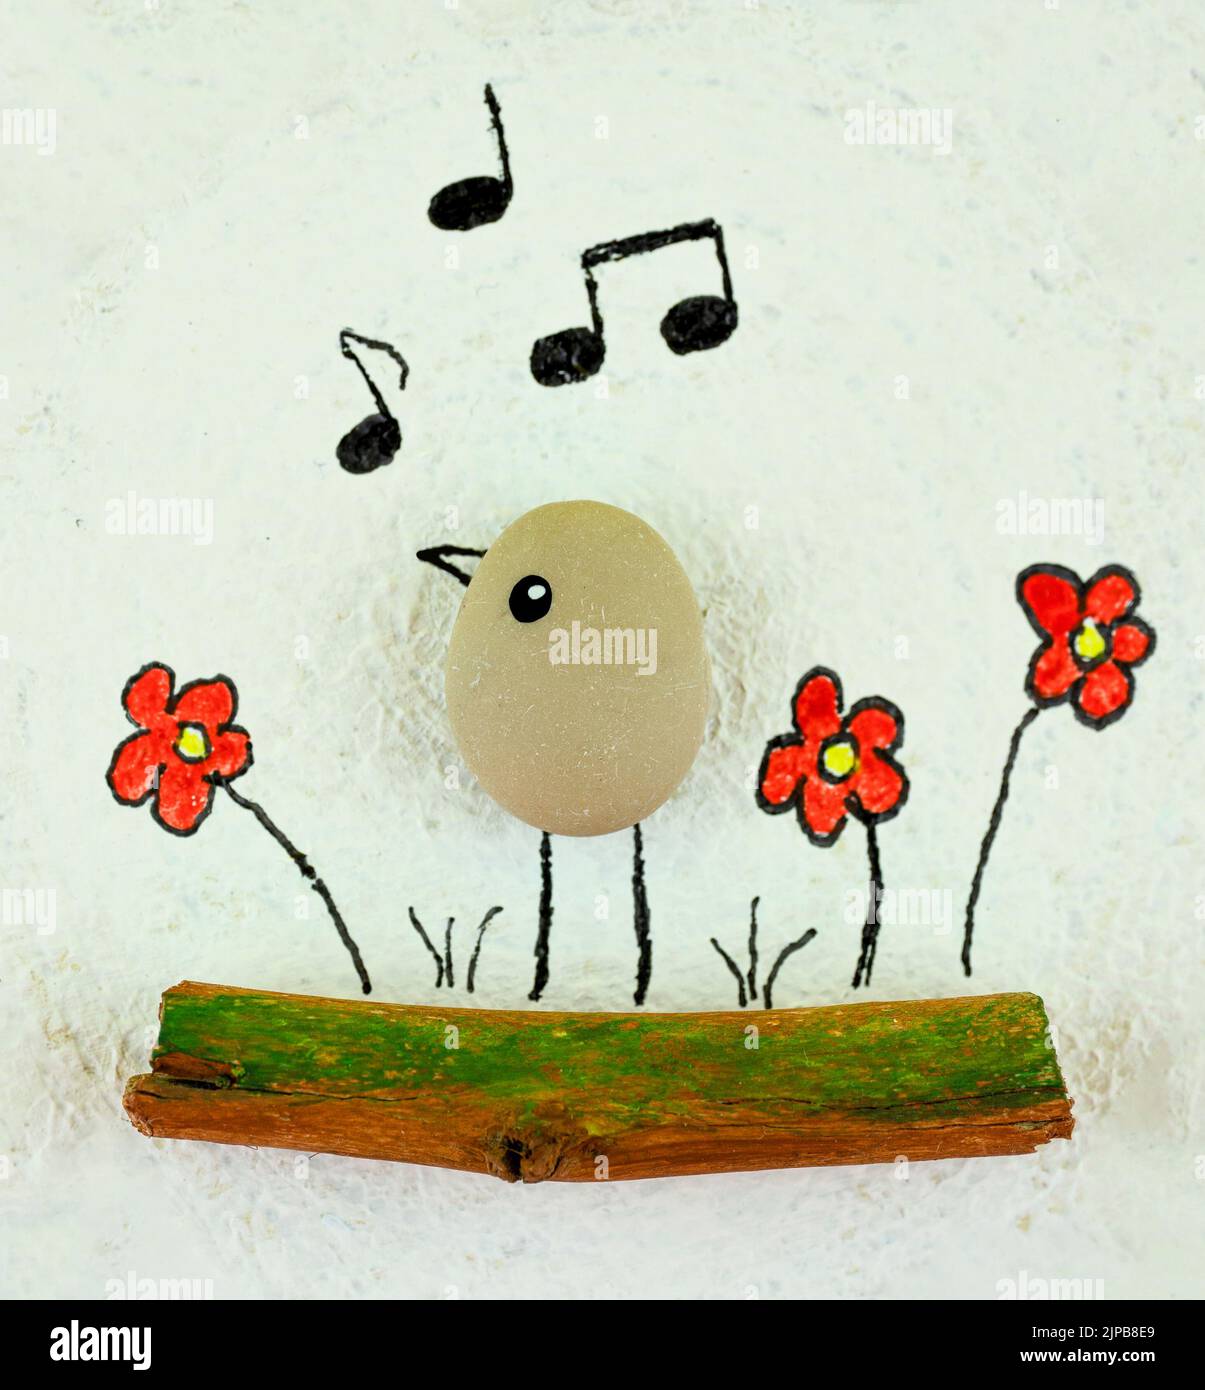 Handmade creative concept with bird made of stone and painted flowers on white background Stock Photo